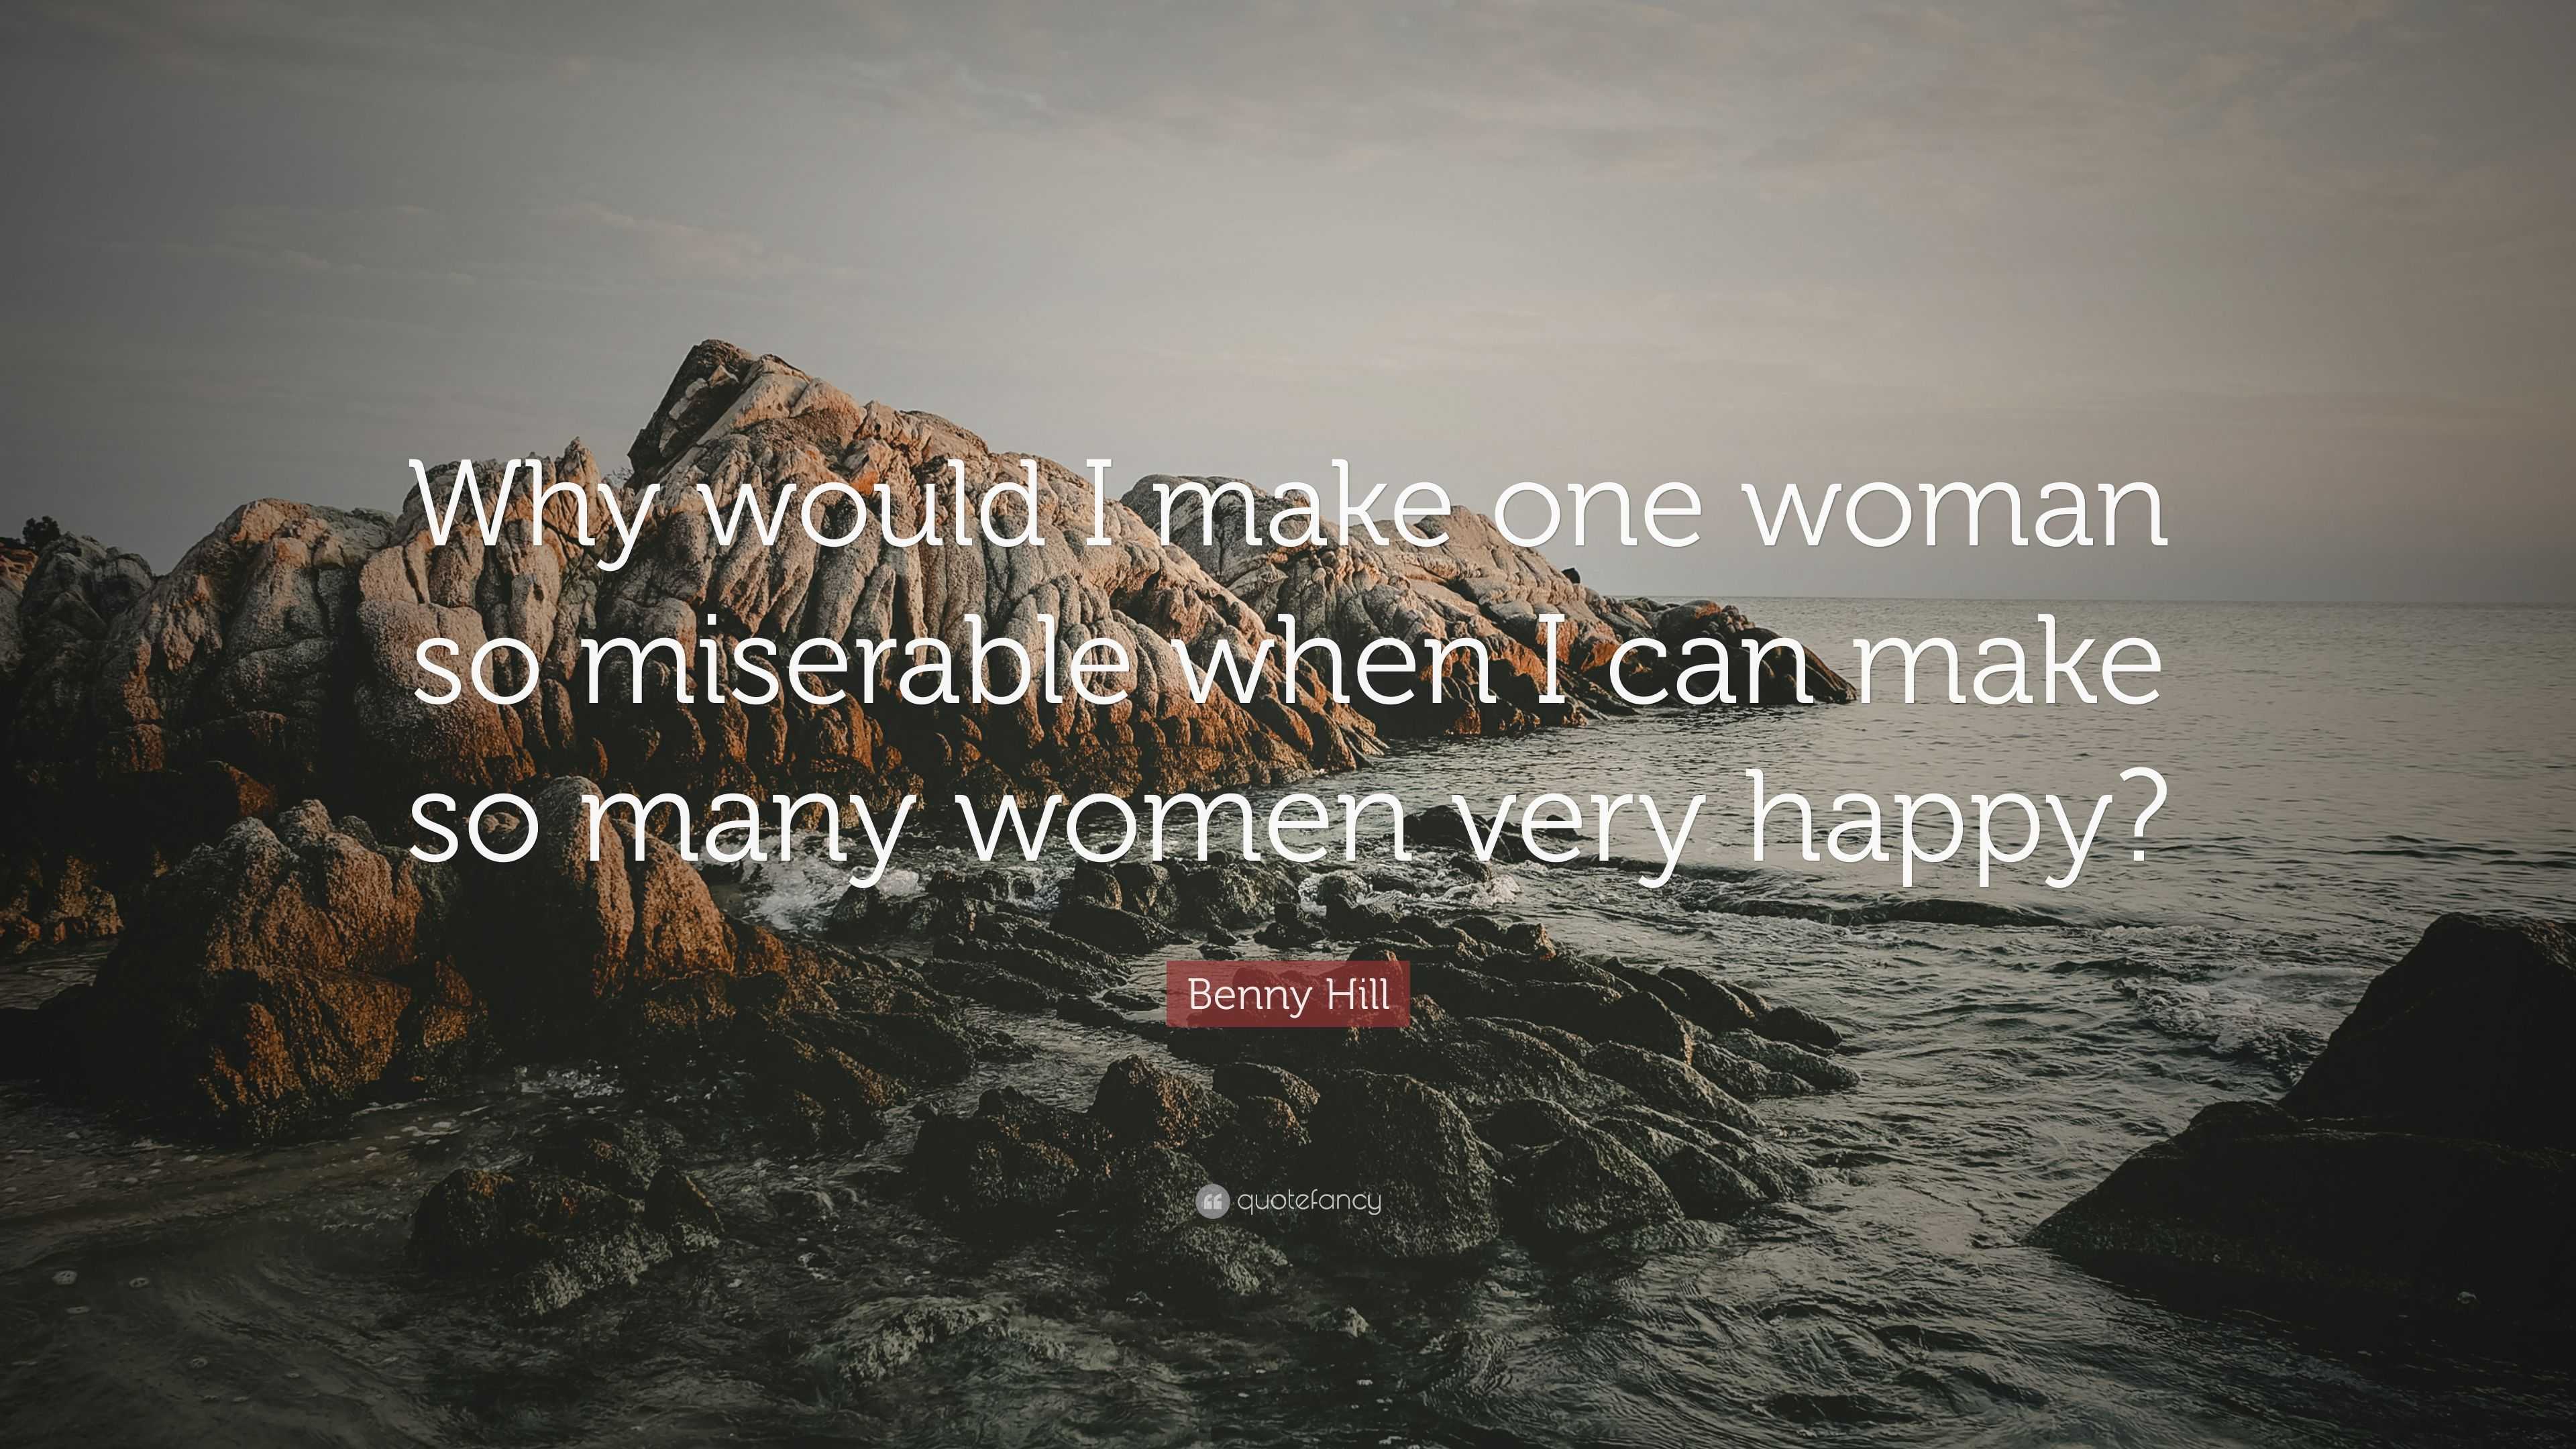 Benny Hill Quote: “Why would I make one woman so miserable when I can